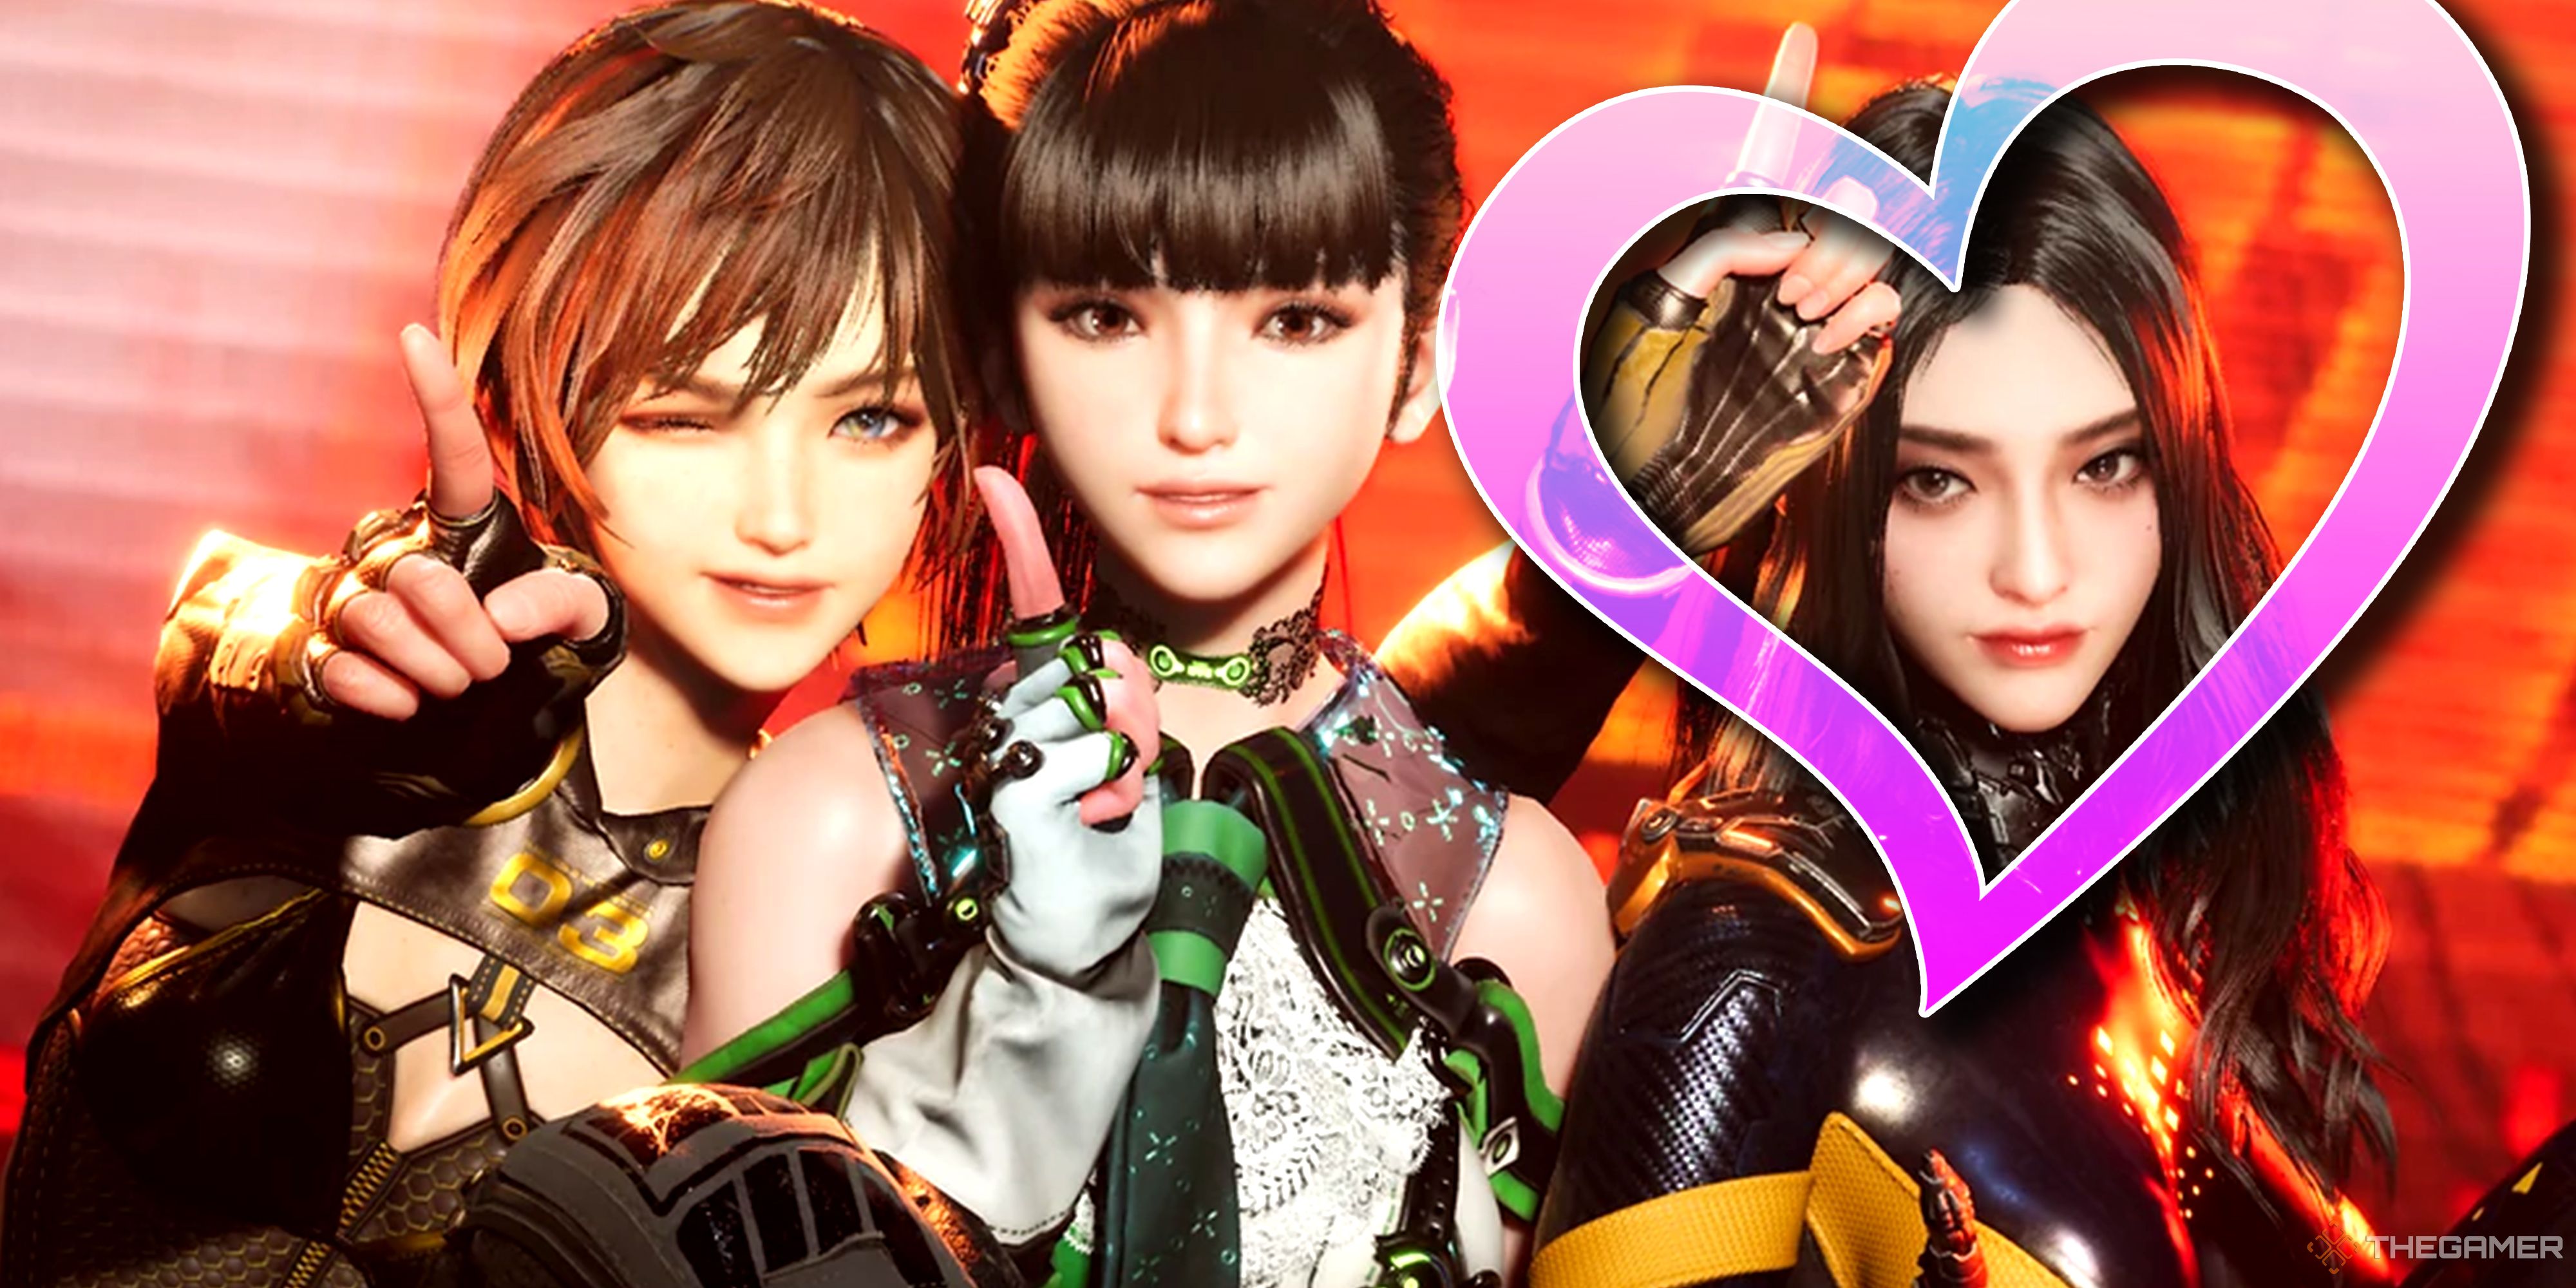 All of Stellar Blade's female protagonists posing side by side, with a heart outlining Tachy's face